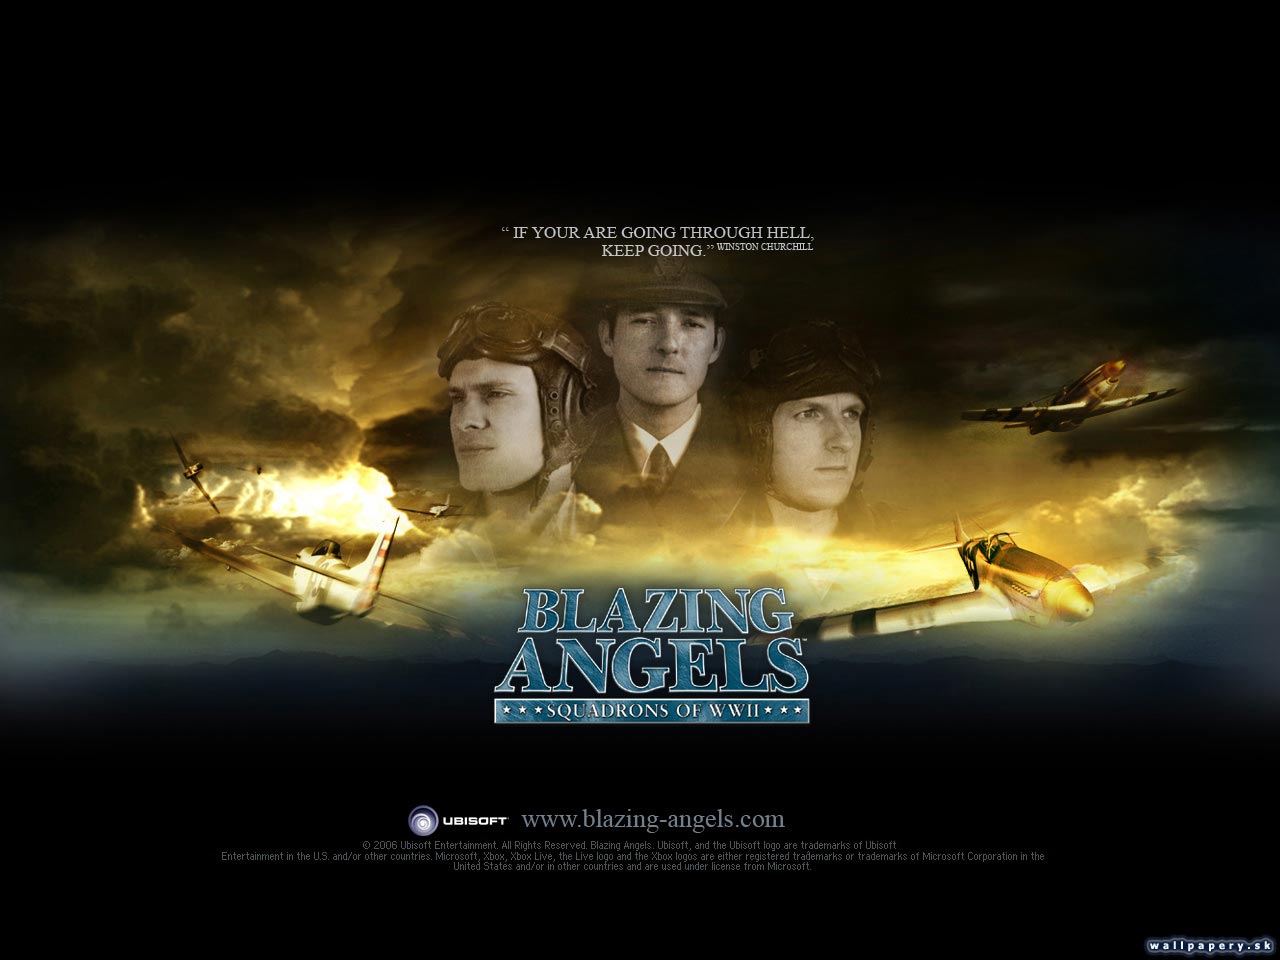 Blazing Angels: Squadrons of WWII - wallpaper 2